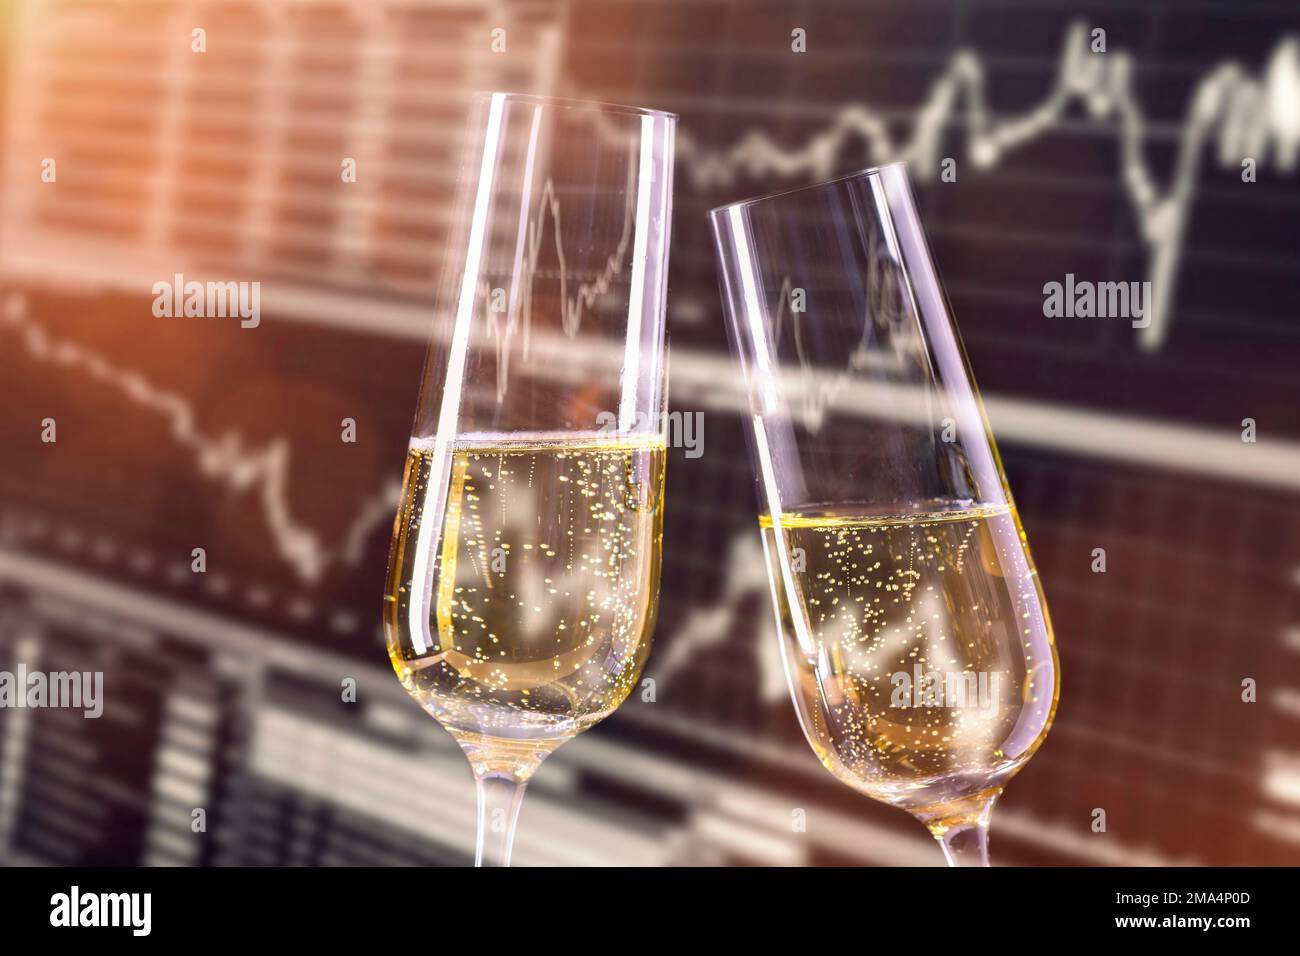 Reason to celebrate at the stock exchange. Champagne glasses and monitor with stock market prices in the background. Stock Photo